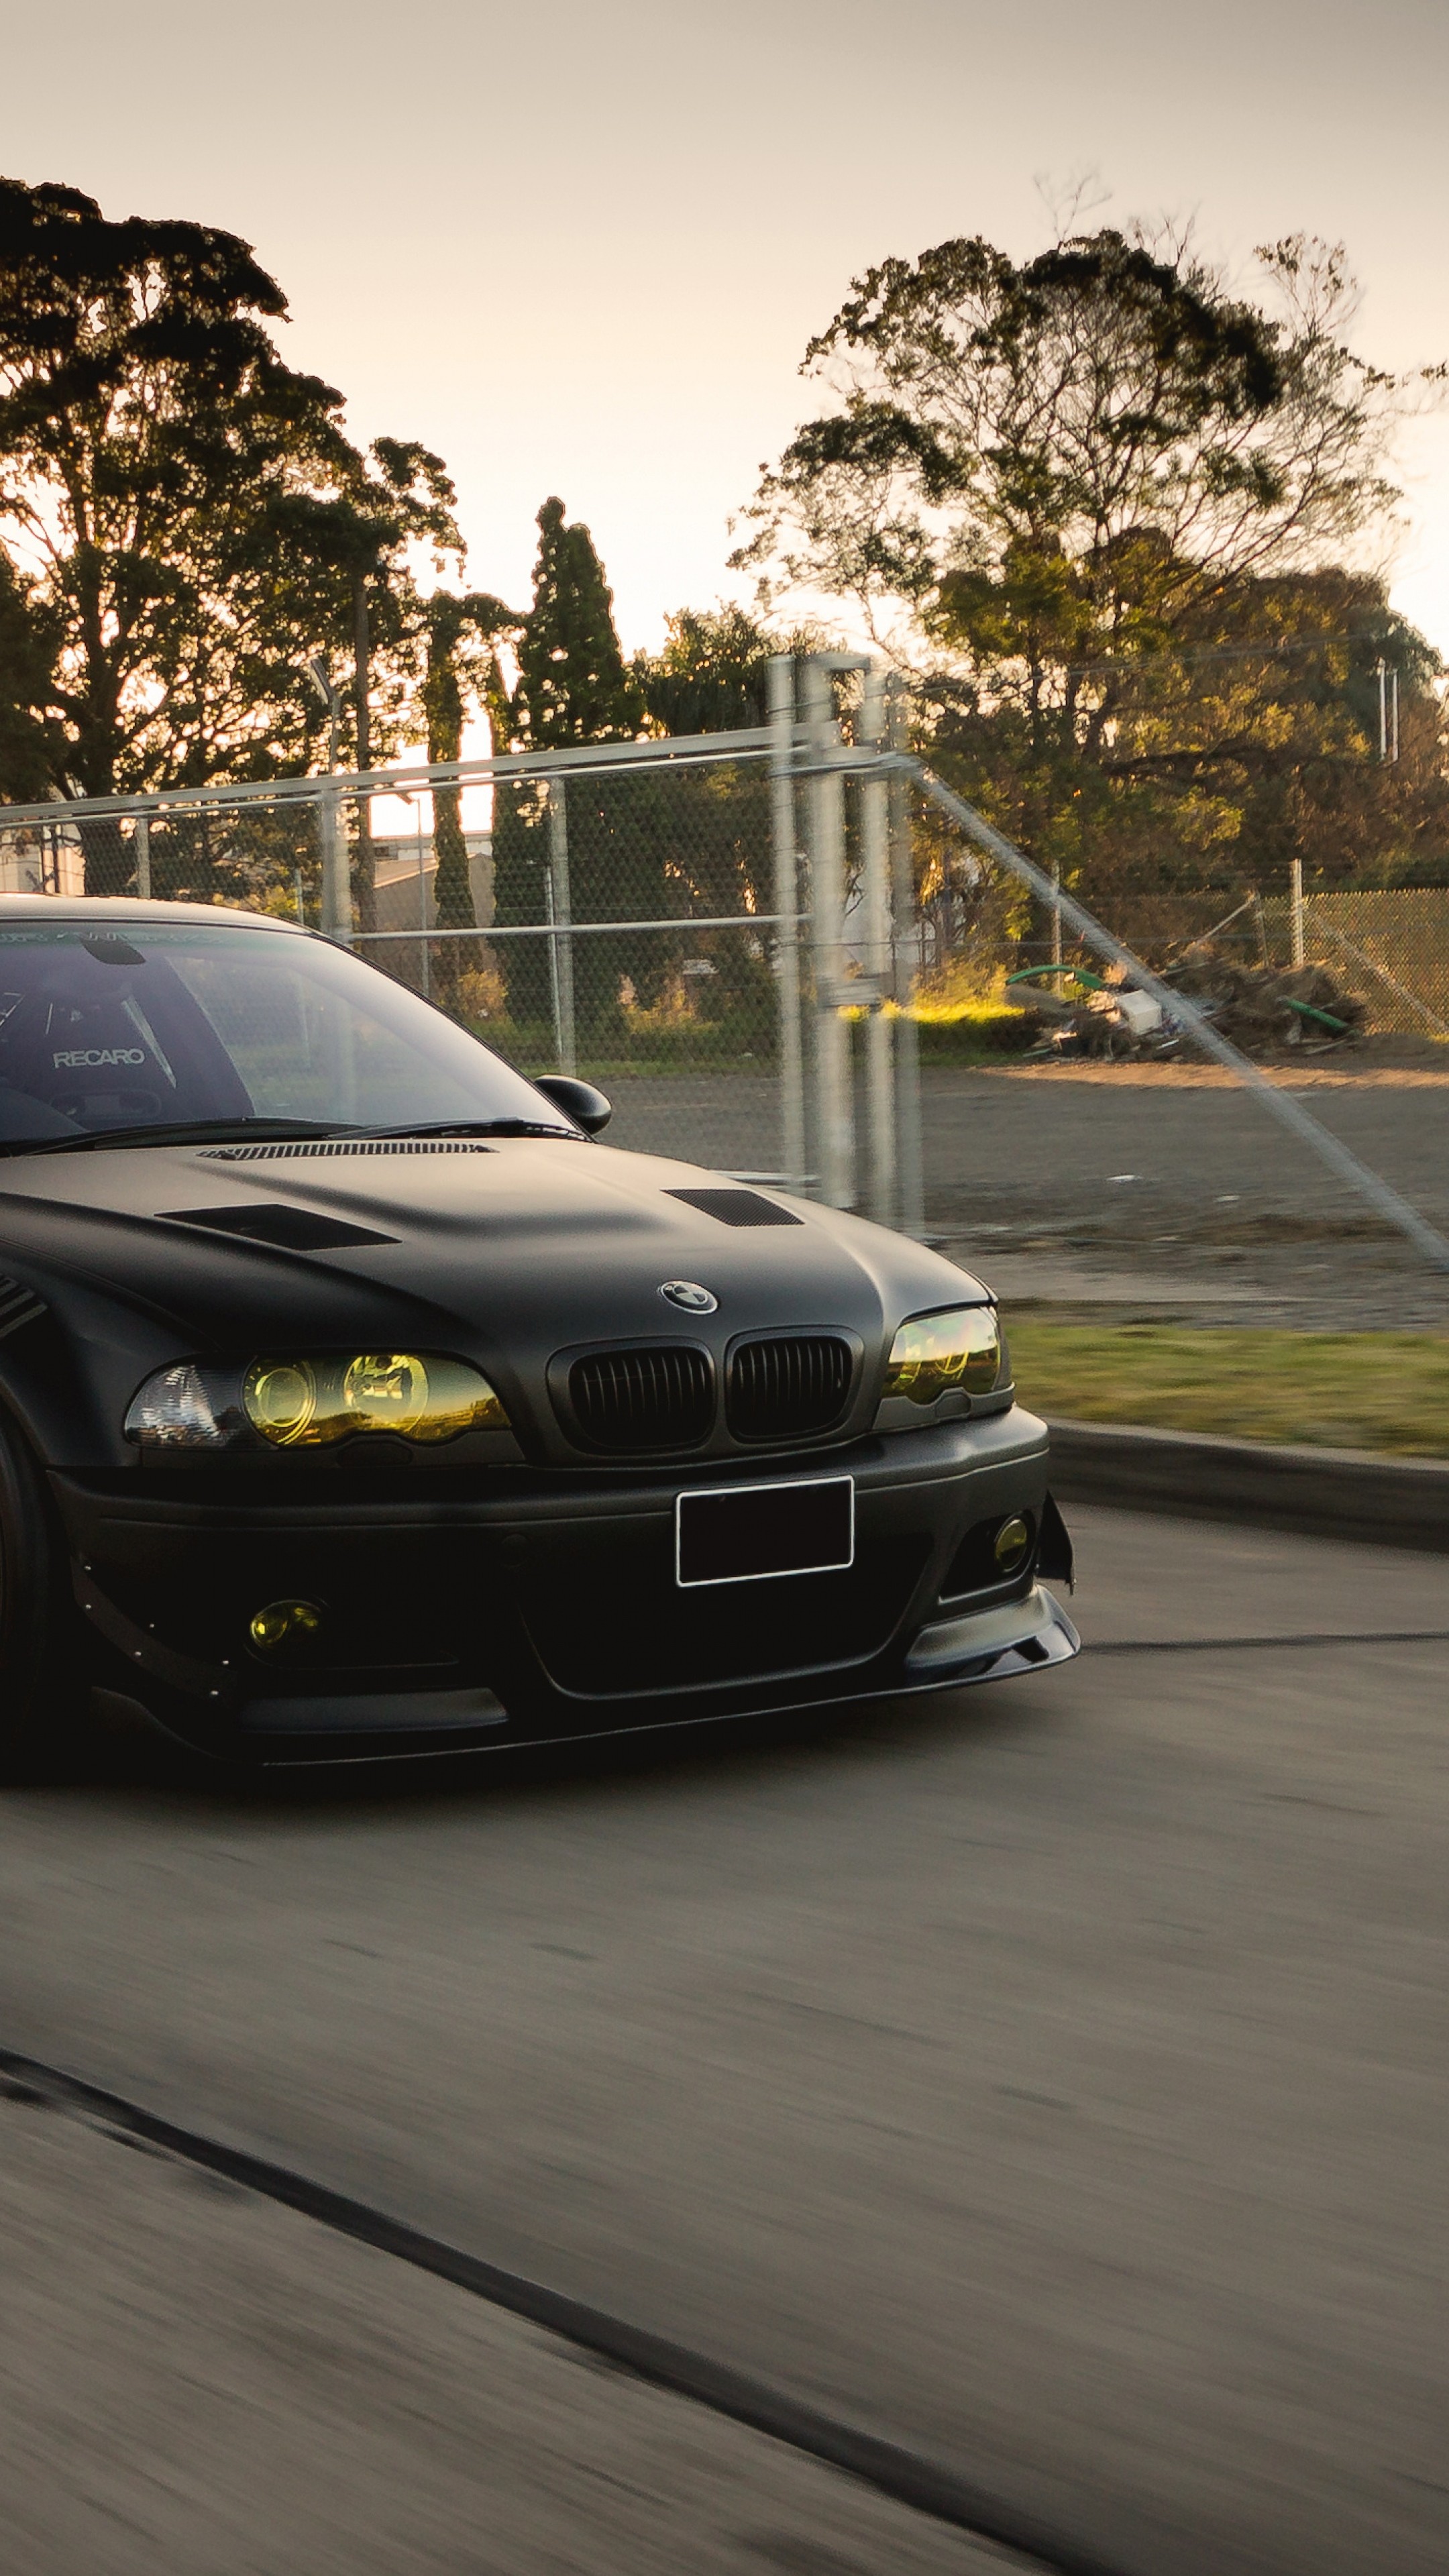 Bmw M3 Photos Download The BEST Free Bmw M3 Stock Photos  HD Images